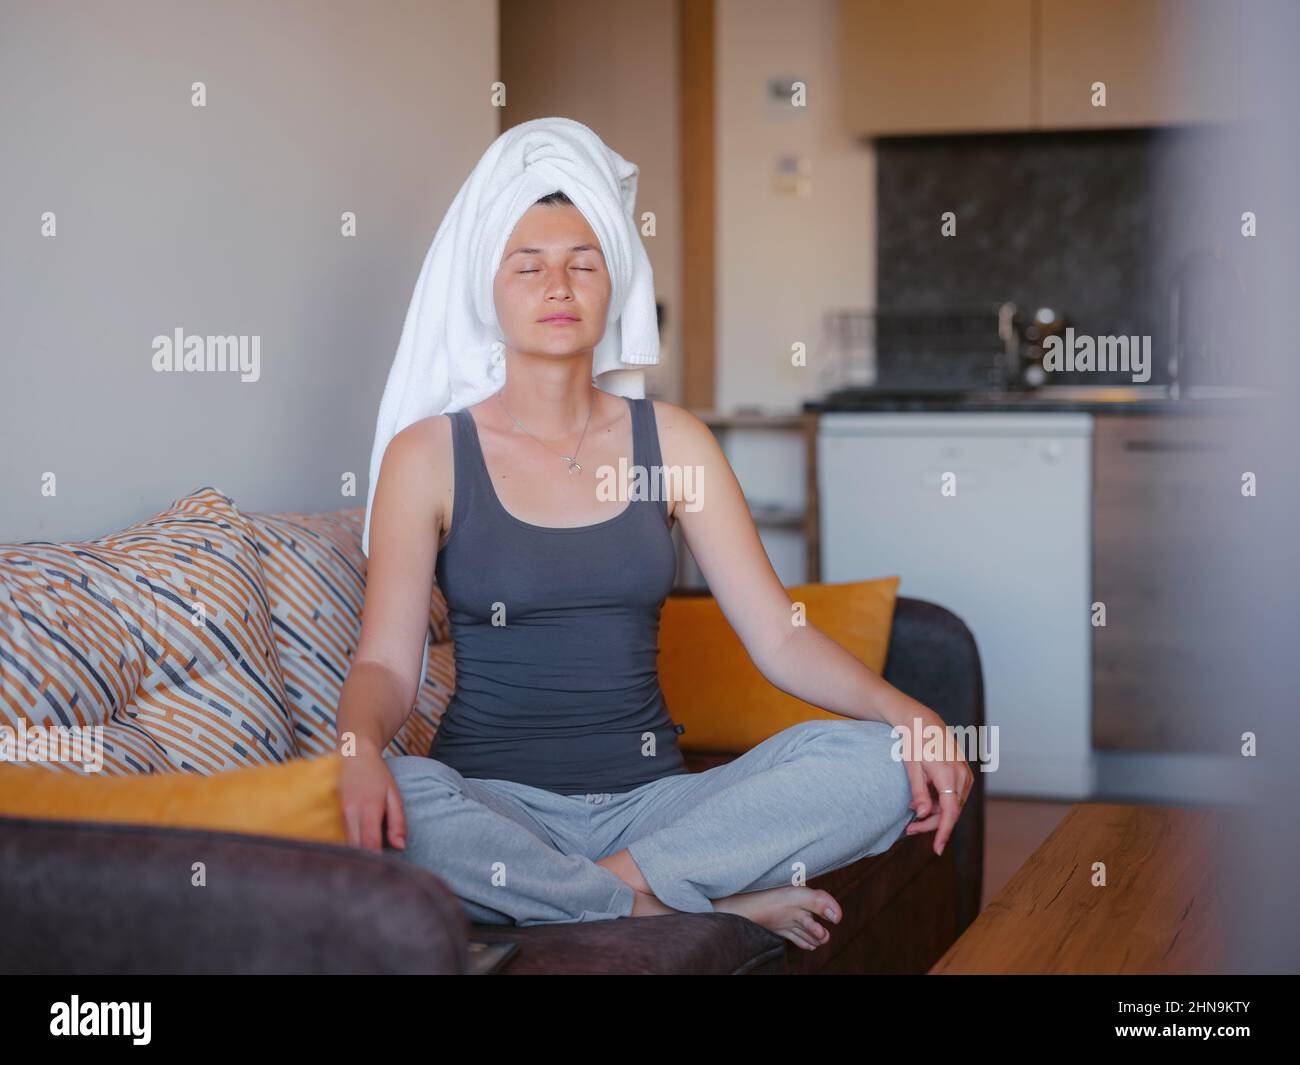 woman sitting on sofa, lotus position puts hands on knees, closed eyes, enjoy meditation, do yoga. No stress, healthy habits, conscious lifestyle, anxiety relief concept Stock Photo